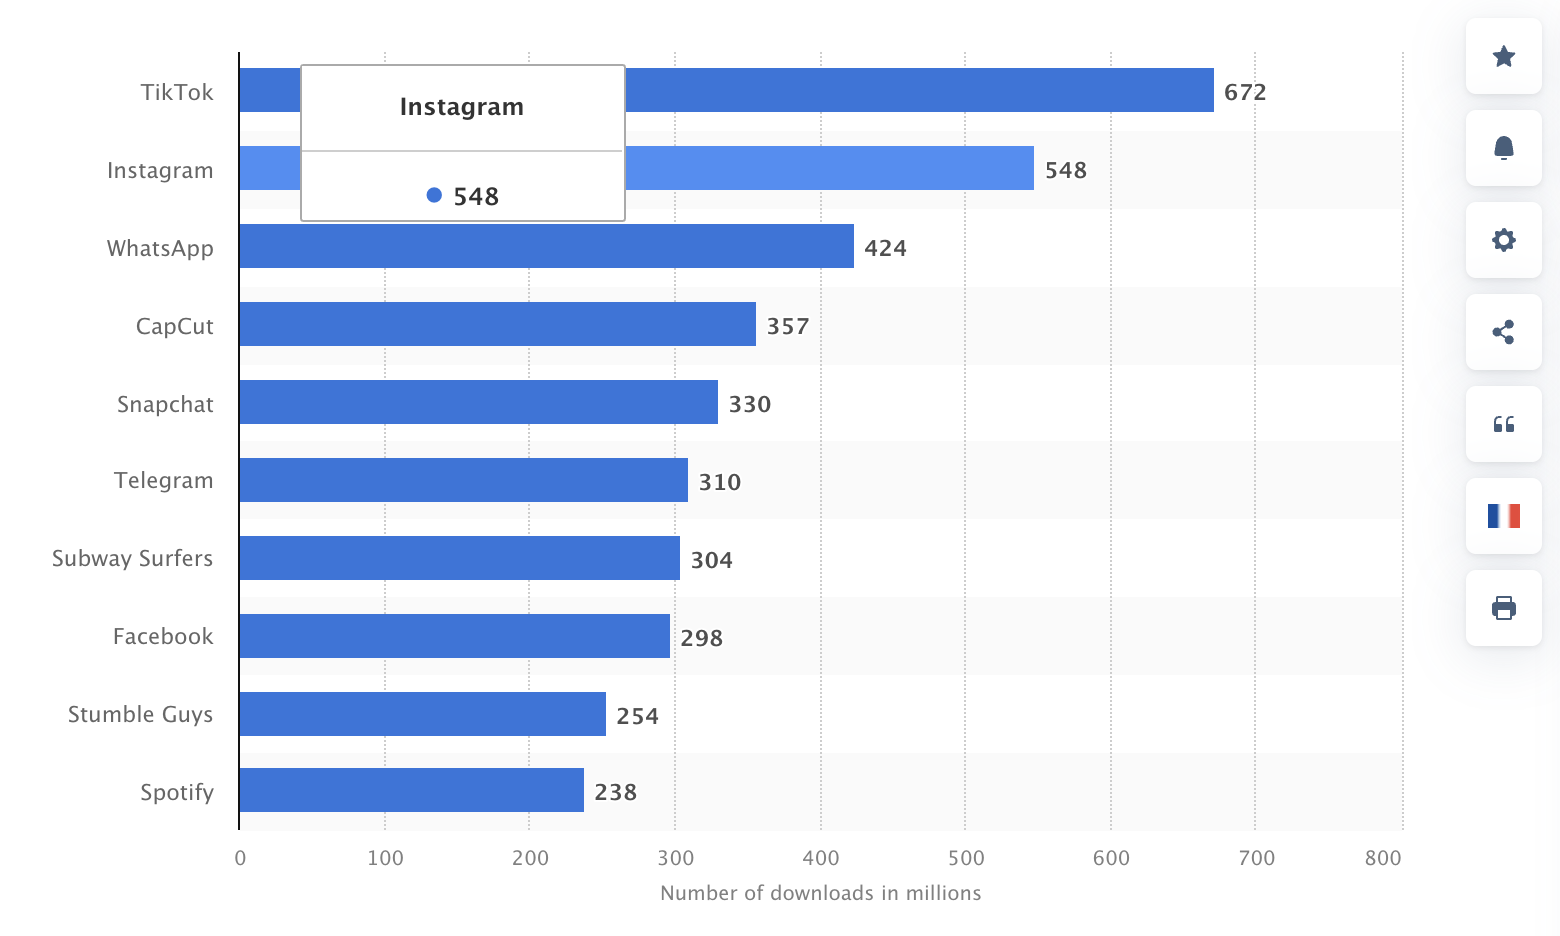 Instagram is the second most downloaded app